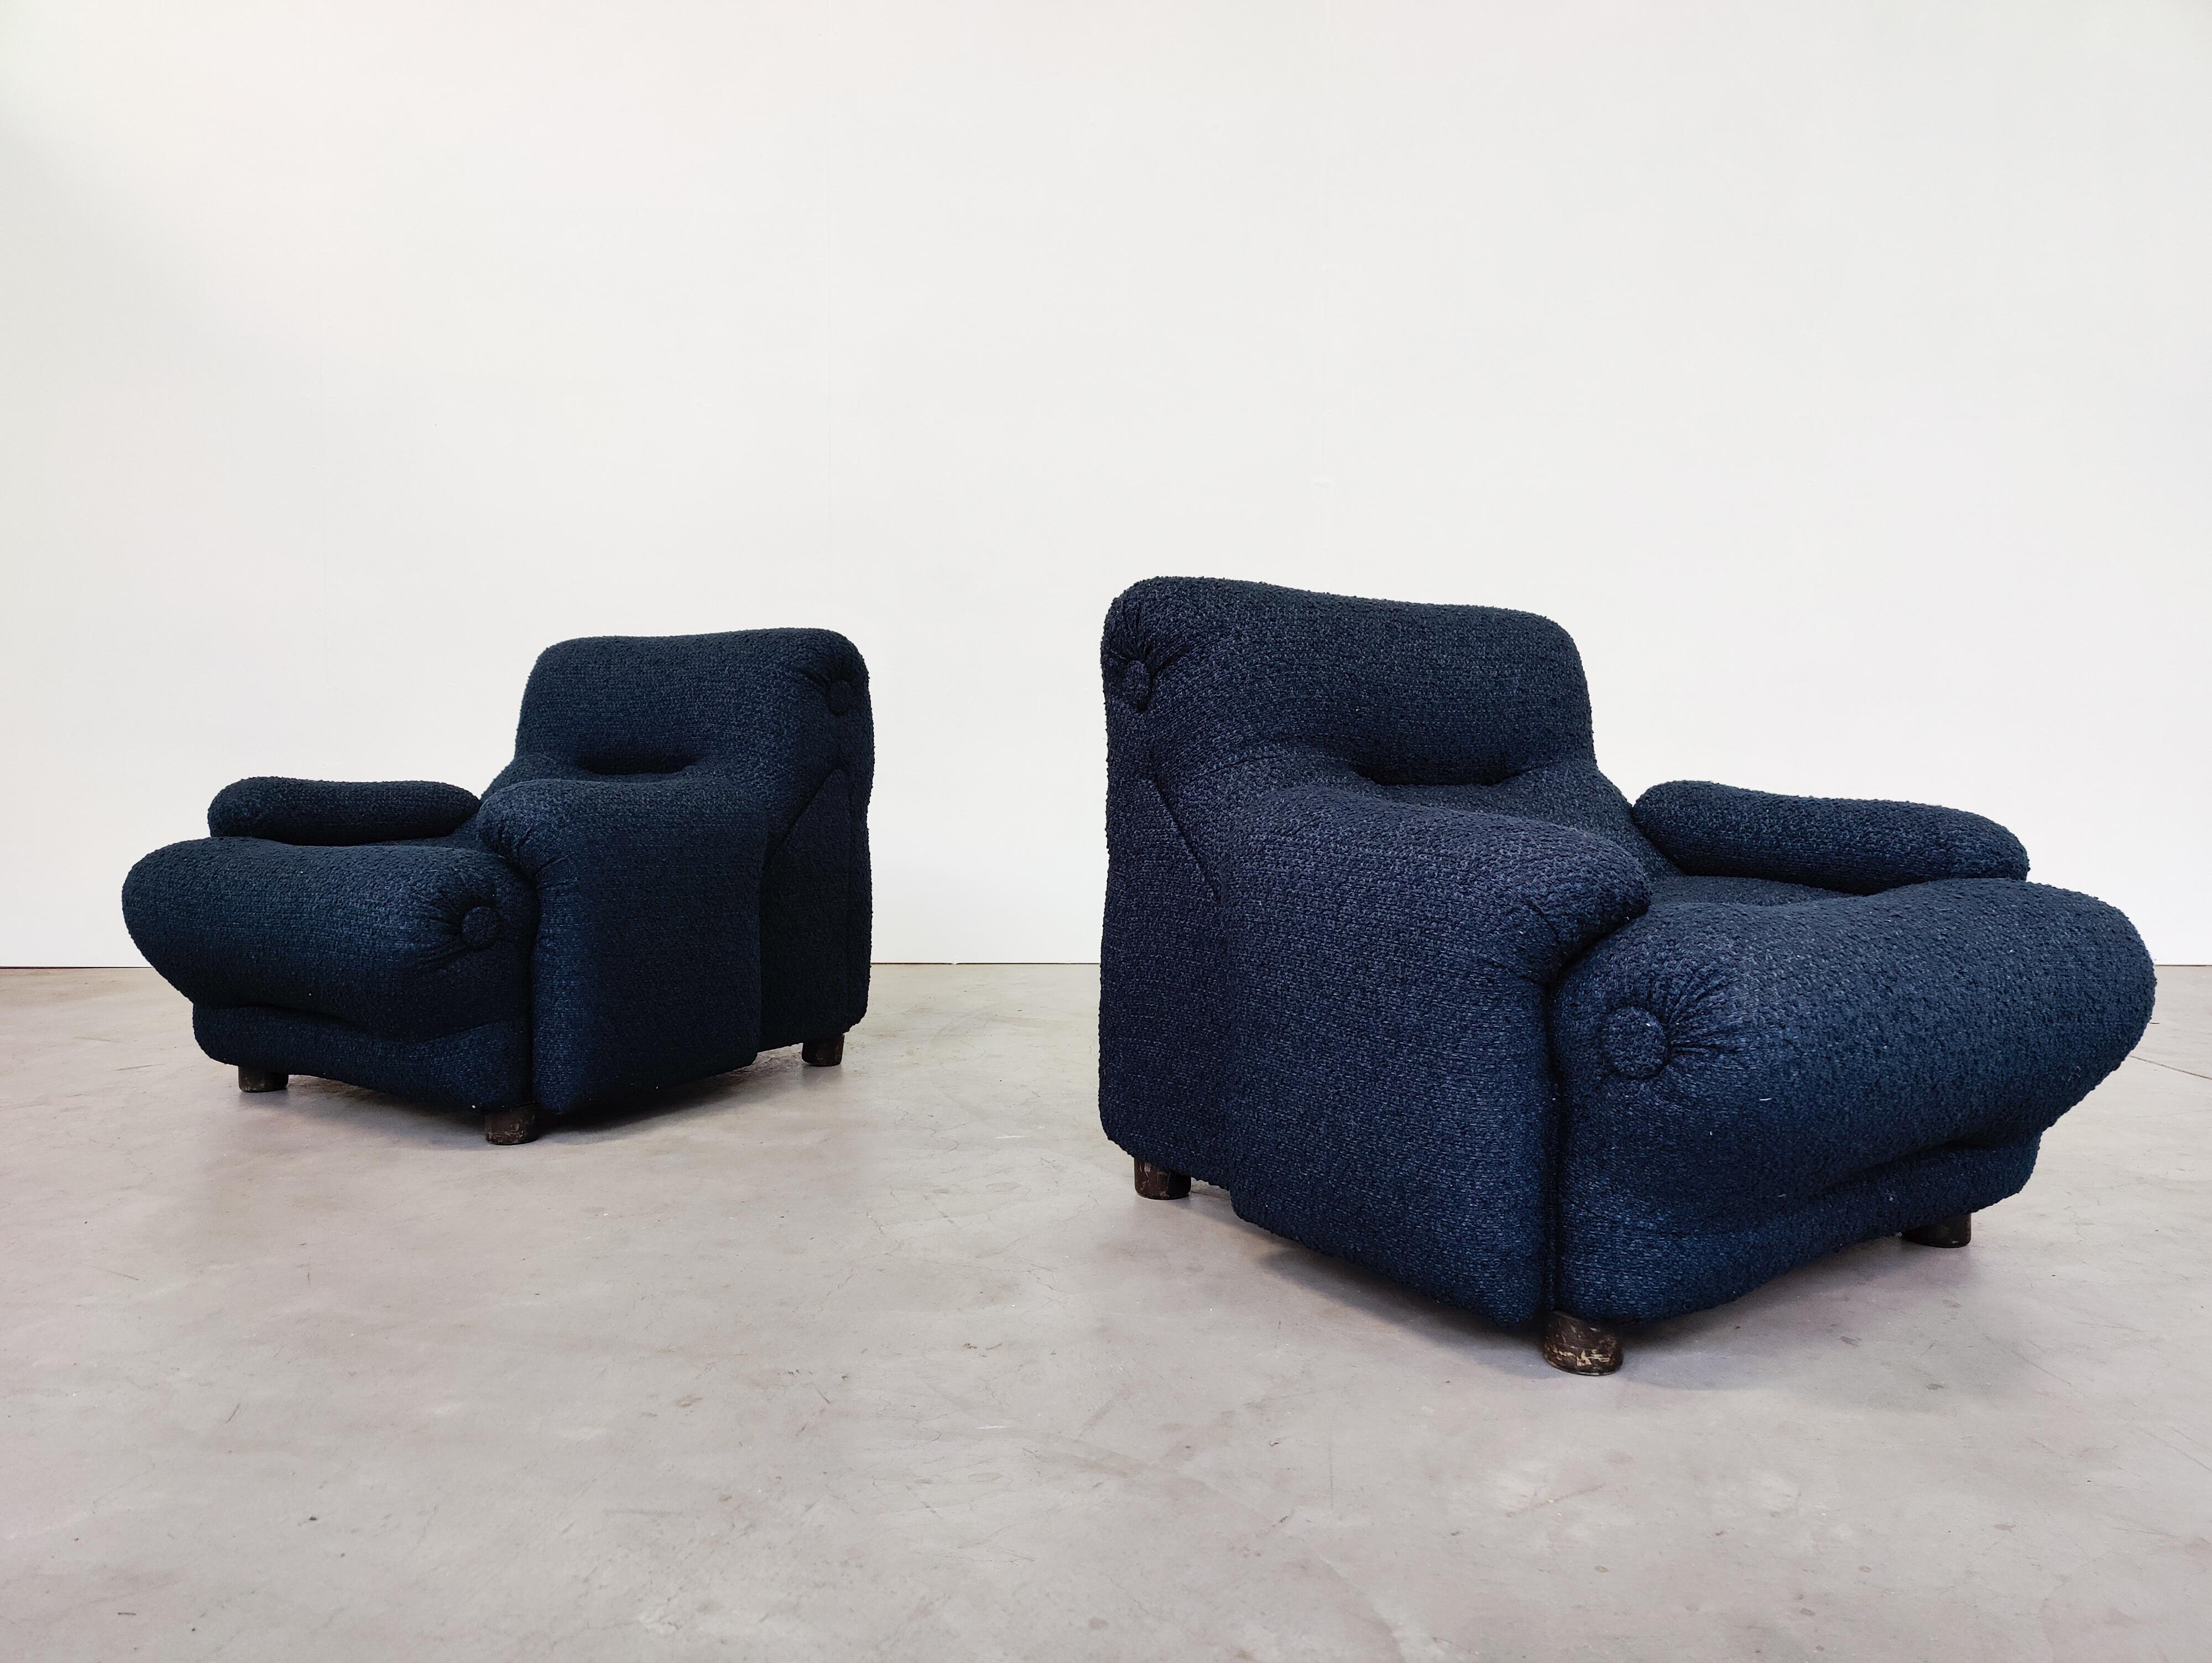 Italian Pair of Rezia Lounge Chairs by Emilio Guarnacci and Felix Padovano for 1P, 1960s For Sale